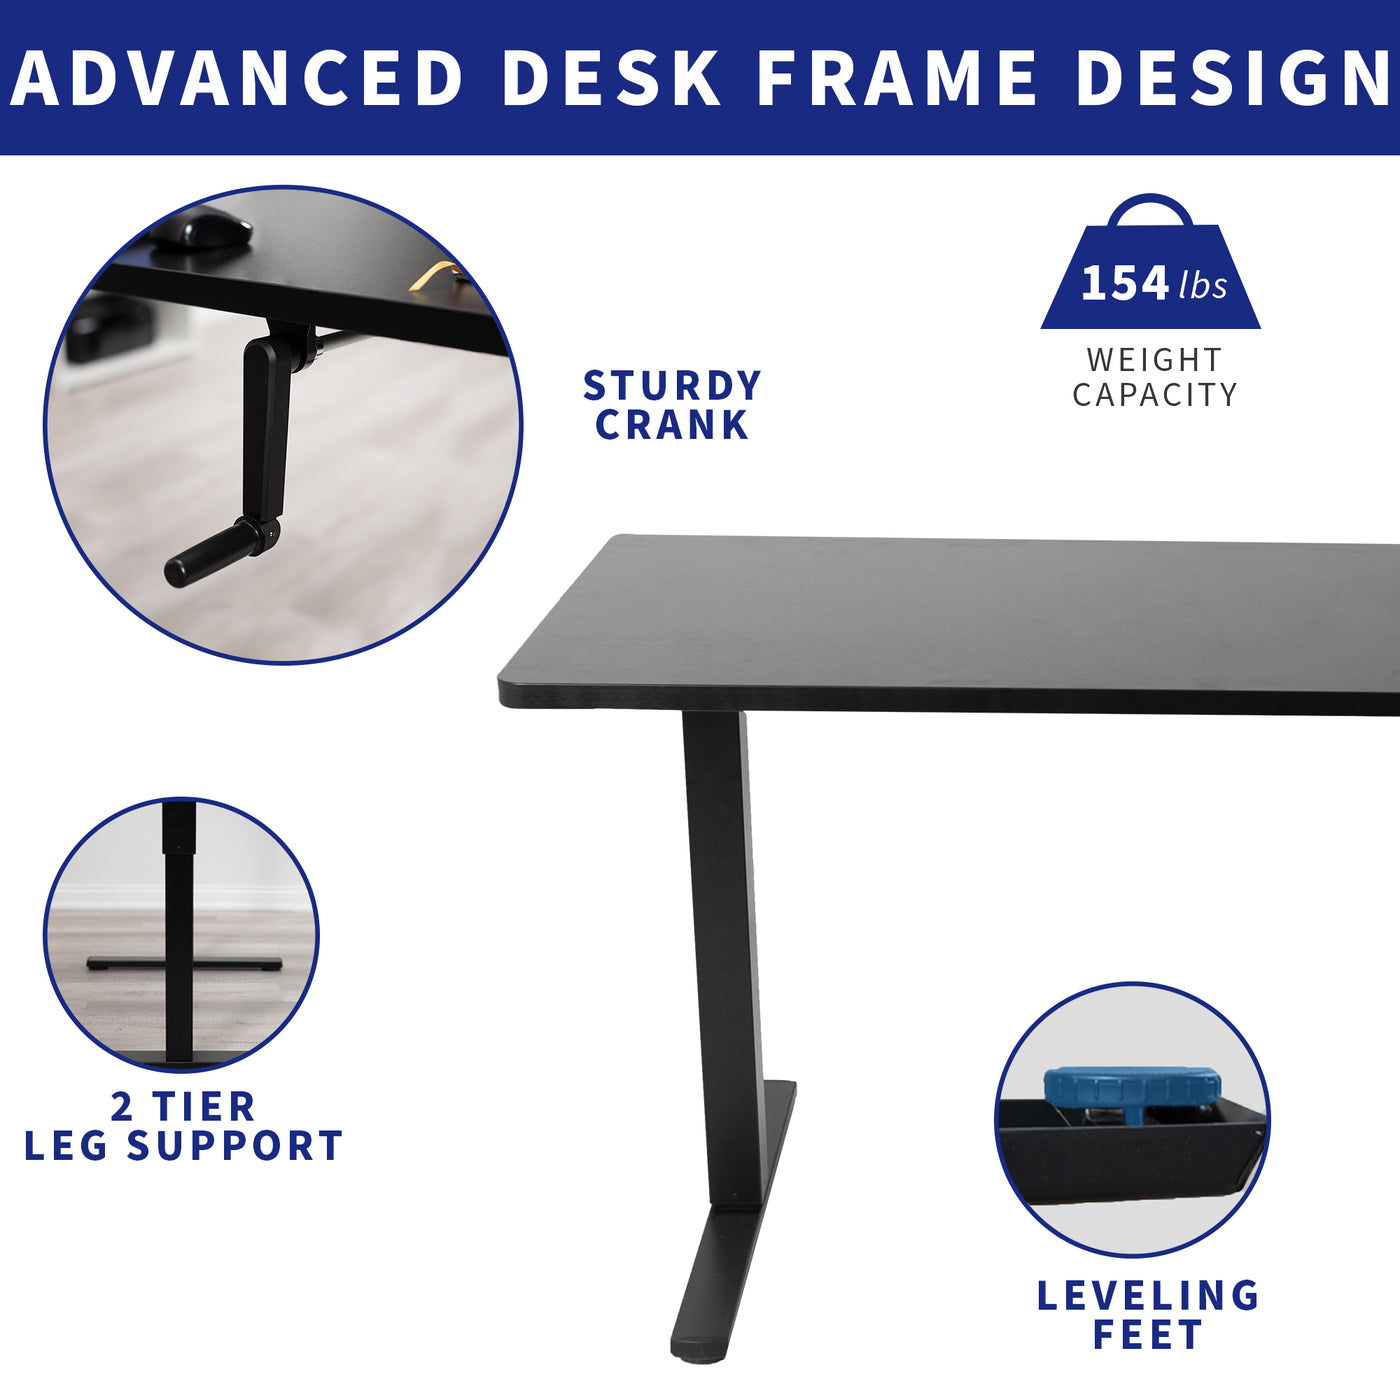 Advanced frame design with sturdy weight capacity, two-tier leg support, and leveling feet, for a perfectly balanced desk.